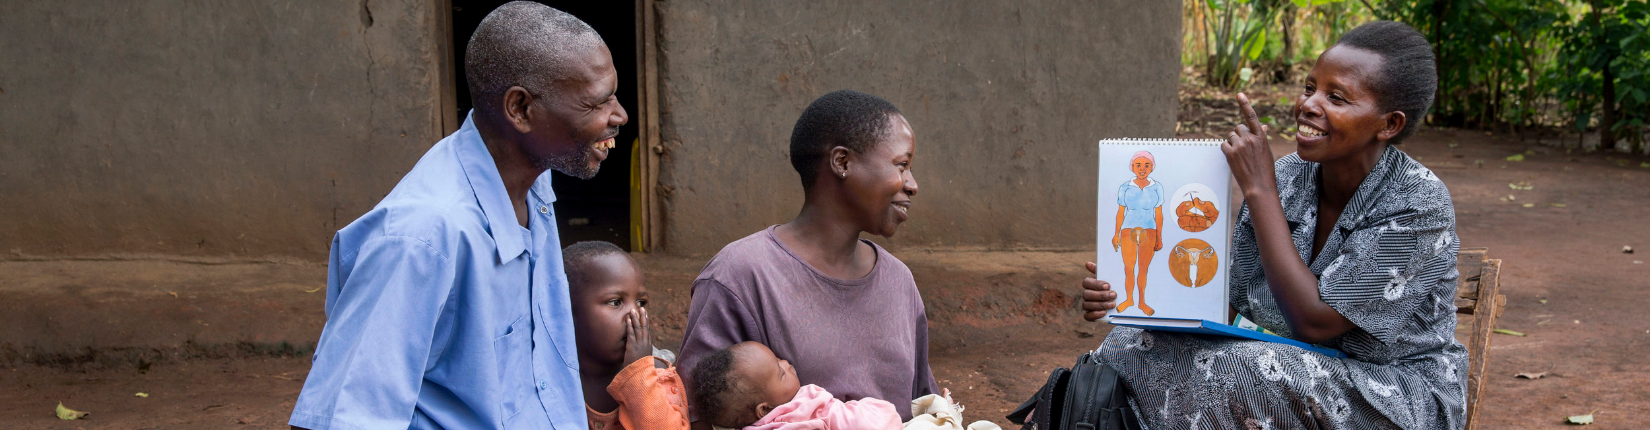 A community health worker shows a flipchart to a family in Uganda